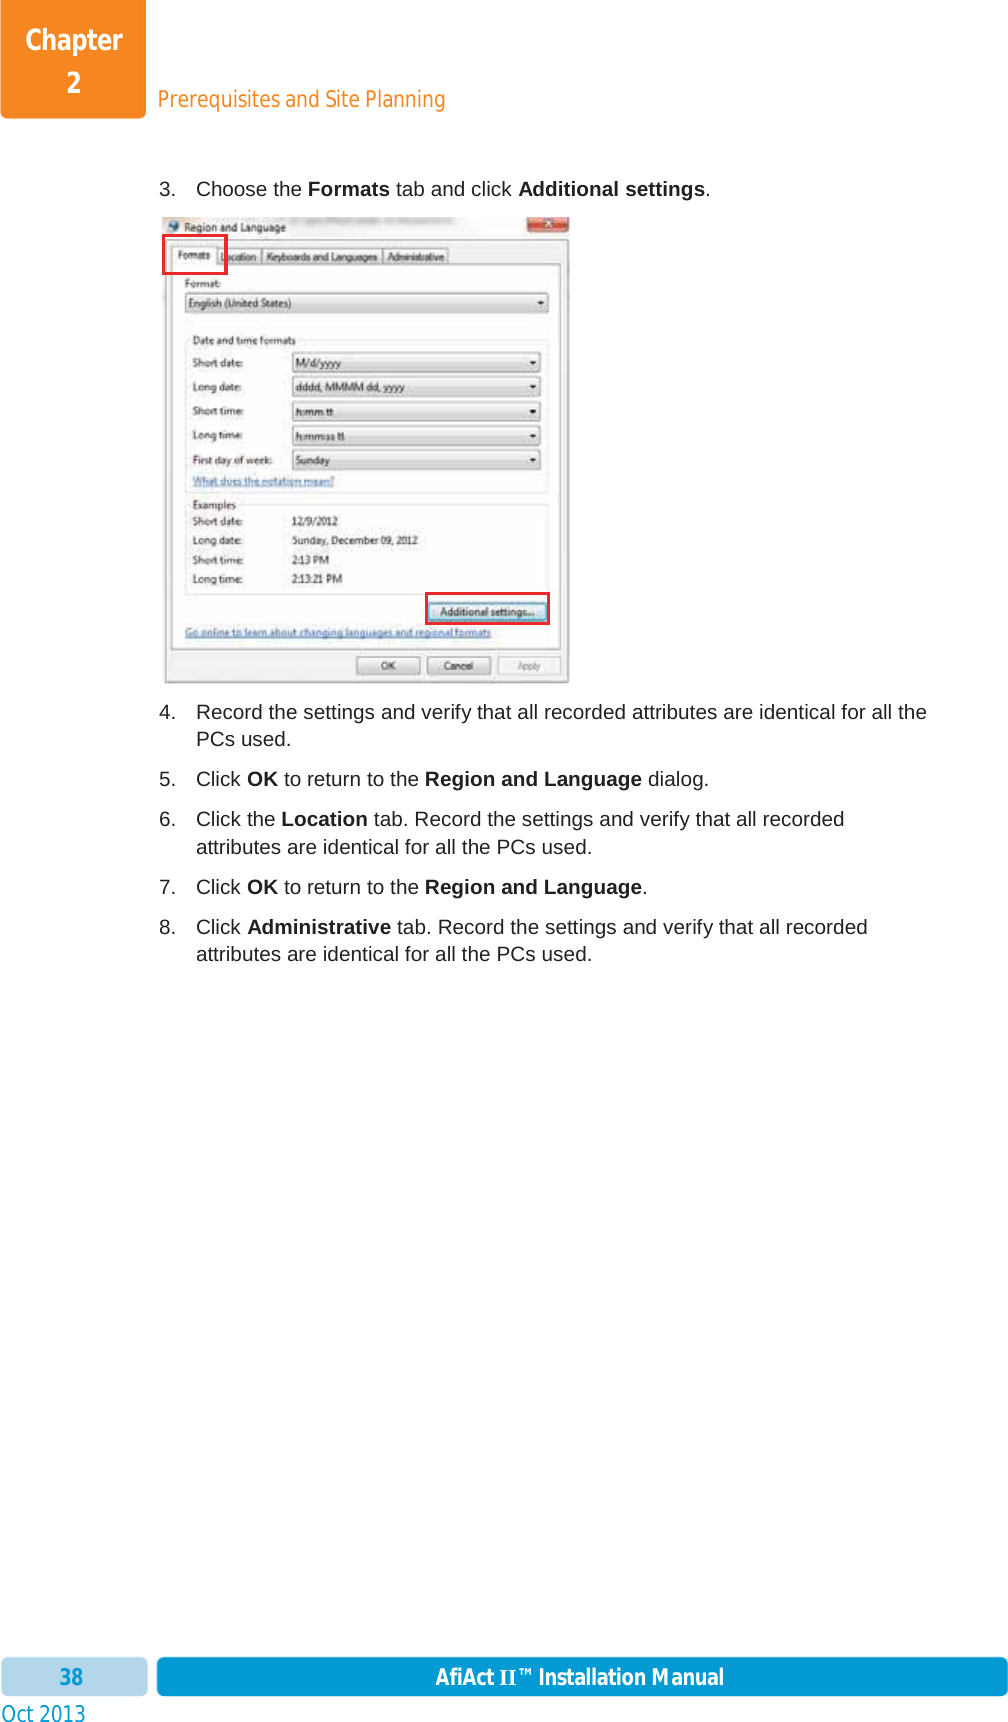 Prerequisites and Site PlanningChapter 2Oct 2013 AfiAct II™ Installation Manual383. Choose the Formats tab and click Additional settings.4.  Record the settings and verify that all recorded attributes are identical for all the PCs used. 5. Click OK to return to the Region and Language dialog. 6. Click the Location tab. Record the settings and verify that all recorded attributes are identical for all the PCs used. 7. Click OK to return to the Region and Language.8. Click Administrative tab. Record the settings and verify that all recorded attributes are identical for all the PCs used. 